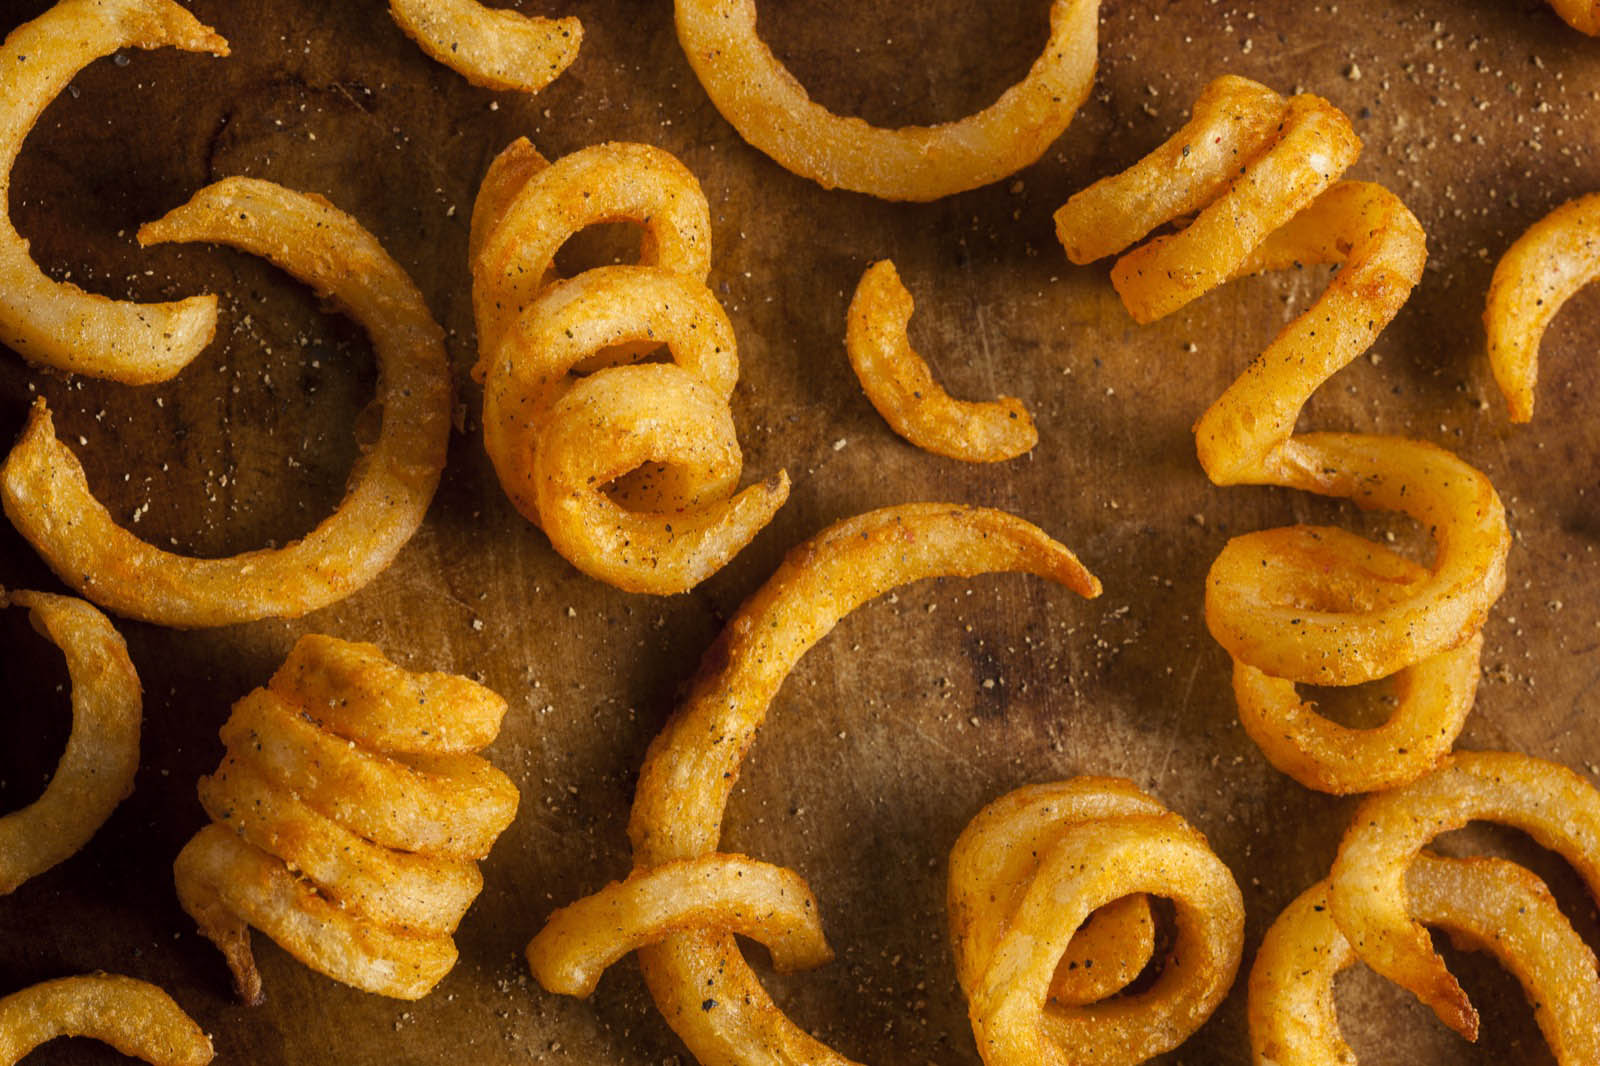 🍟 Believe It or Not, We Can Guess Your Age Just by How You Rate These Potato Dishes Curly fries